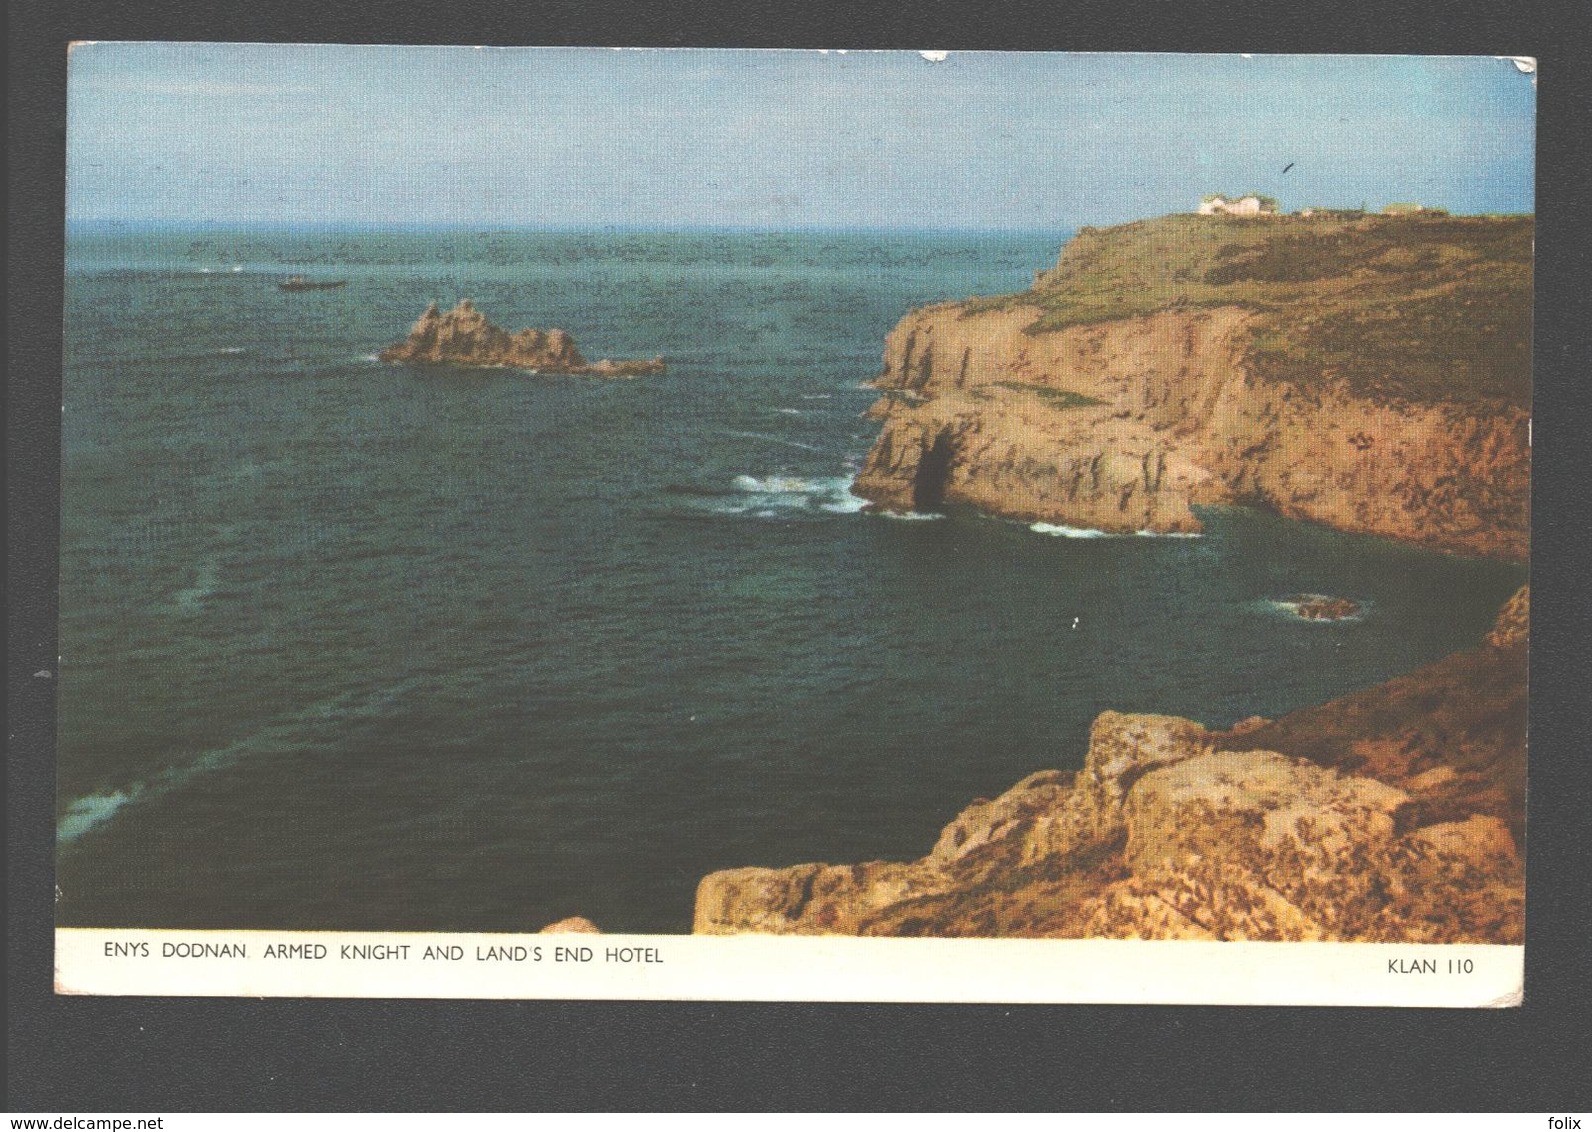 Land's End - Enys Dodnan, Armed Knight And Land's End Hotel - 1955 - Land's End